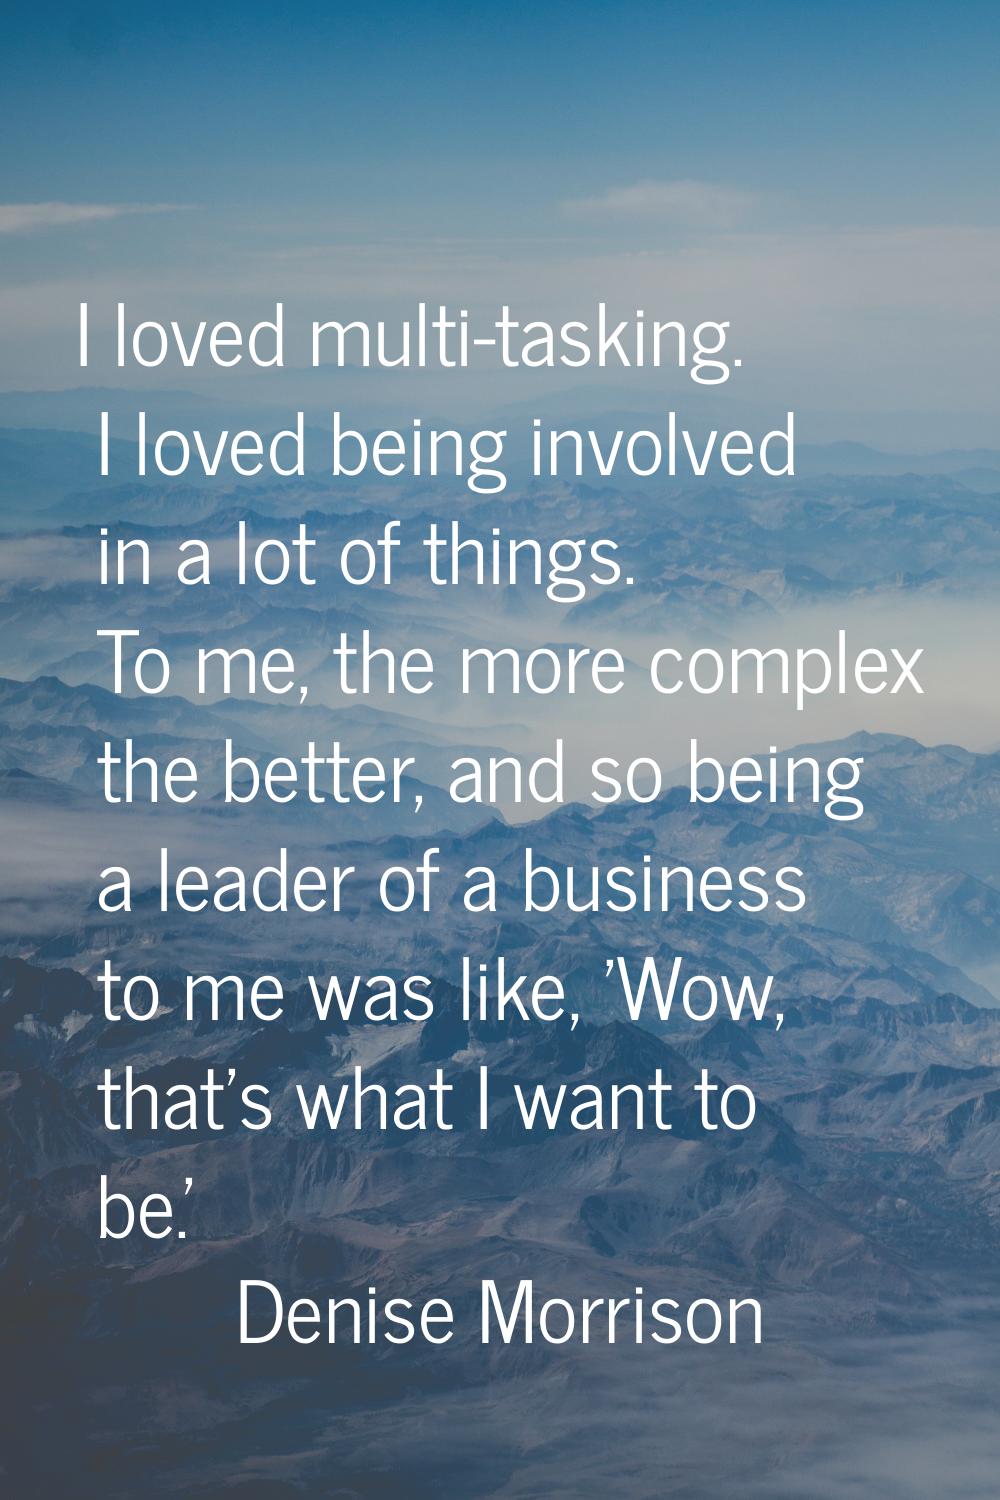 I loved multi-tasking. I loved being involved in a lot of things. To me, the more complex the bette